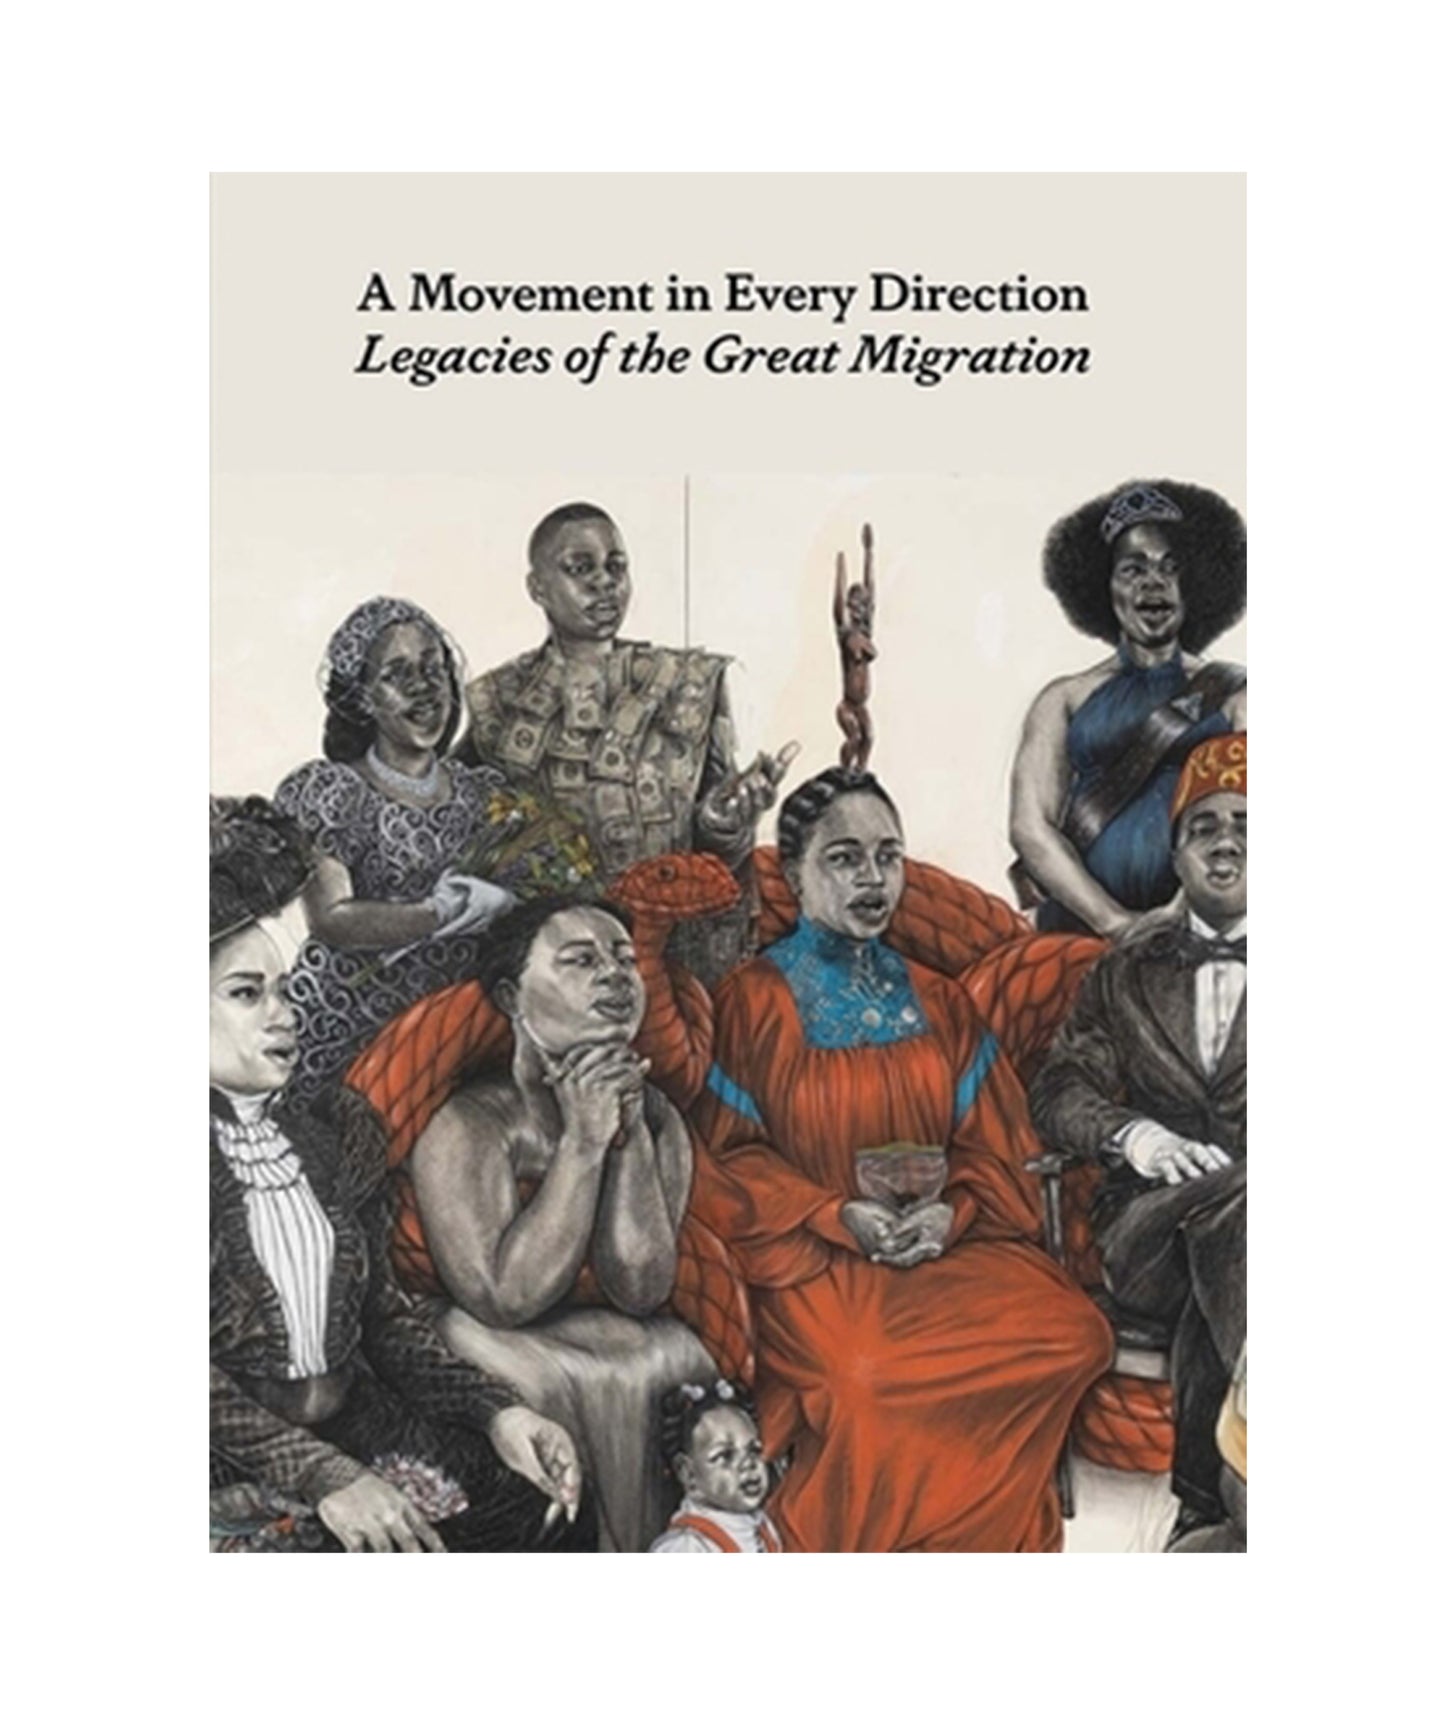 A Movement in Every Direction: Legacies of the Great Migration